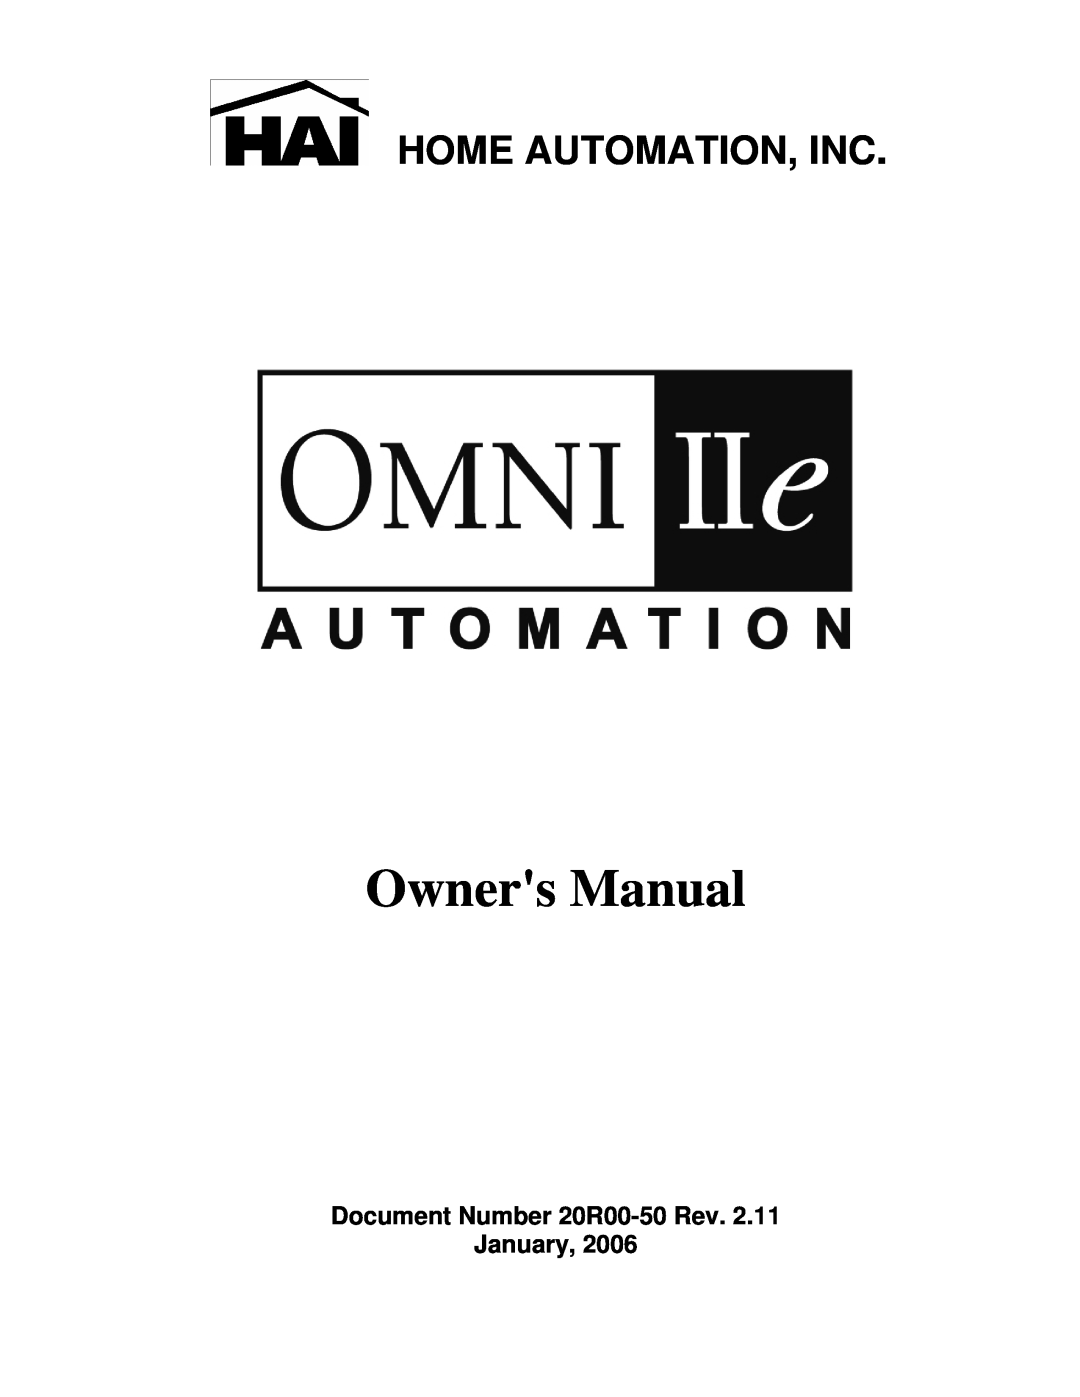 Home Automation INC. Omni IIe, HOME AUTOMATION owner manual Home Automation, Inc, Document Number 20R00-50Rev. January 